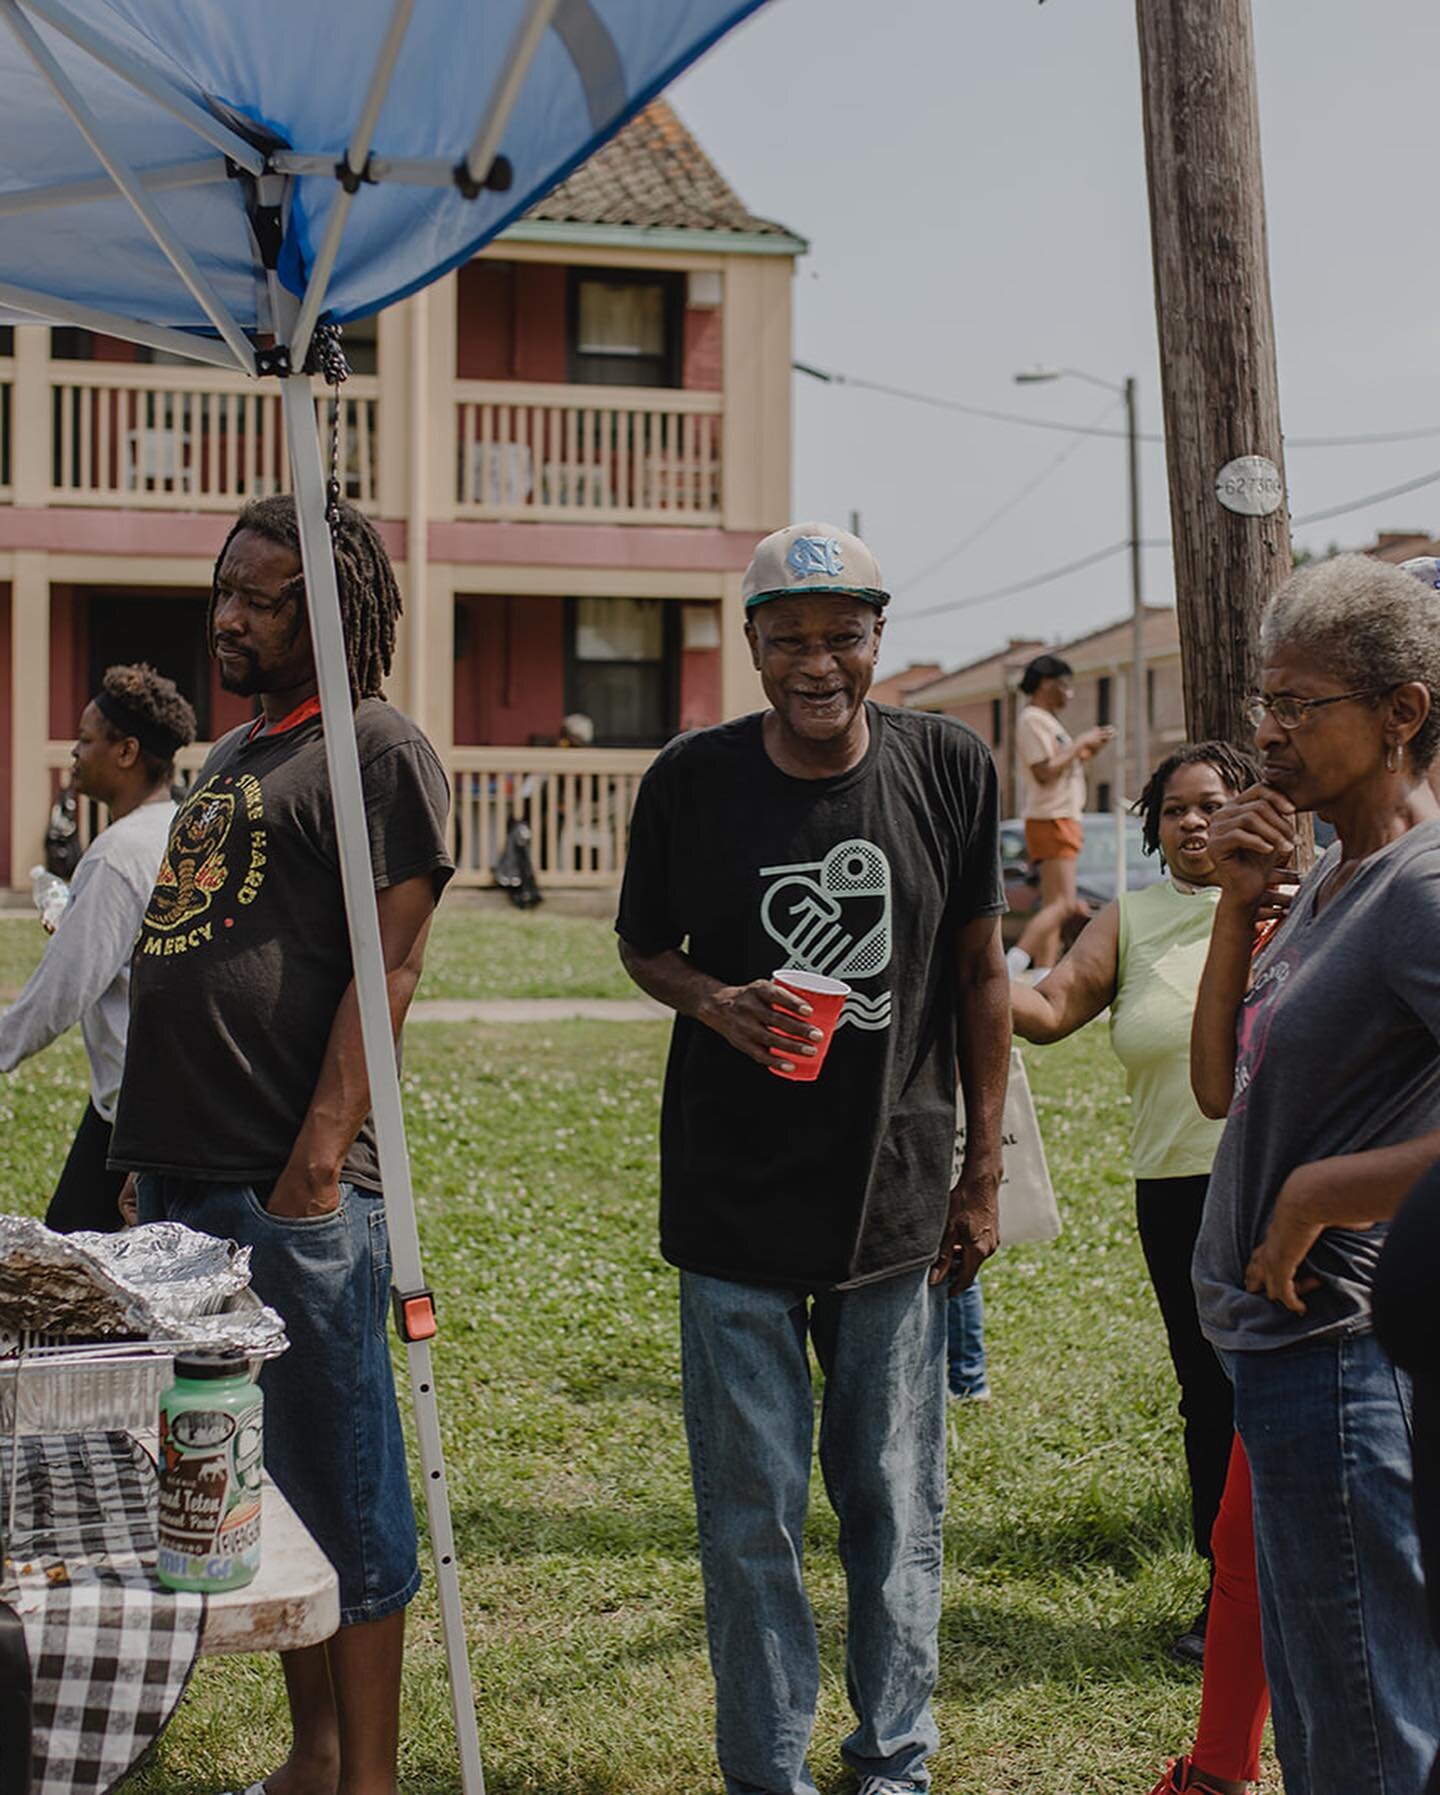 ✊🏽The work continues ✊🏽

We celebrated Juneteenth with a mutual aid event in Gadsden Green. We engaged with the residents about our ongoing monthly tenant meetings. It could not have been a more perfect day for some community engagement and a cooko